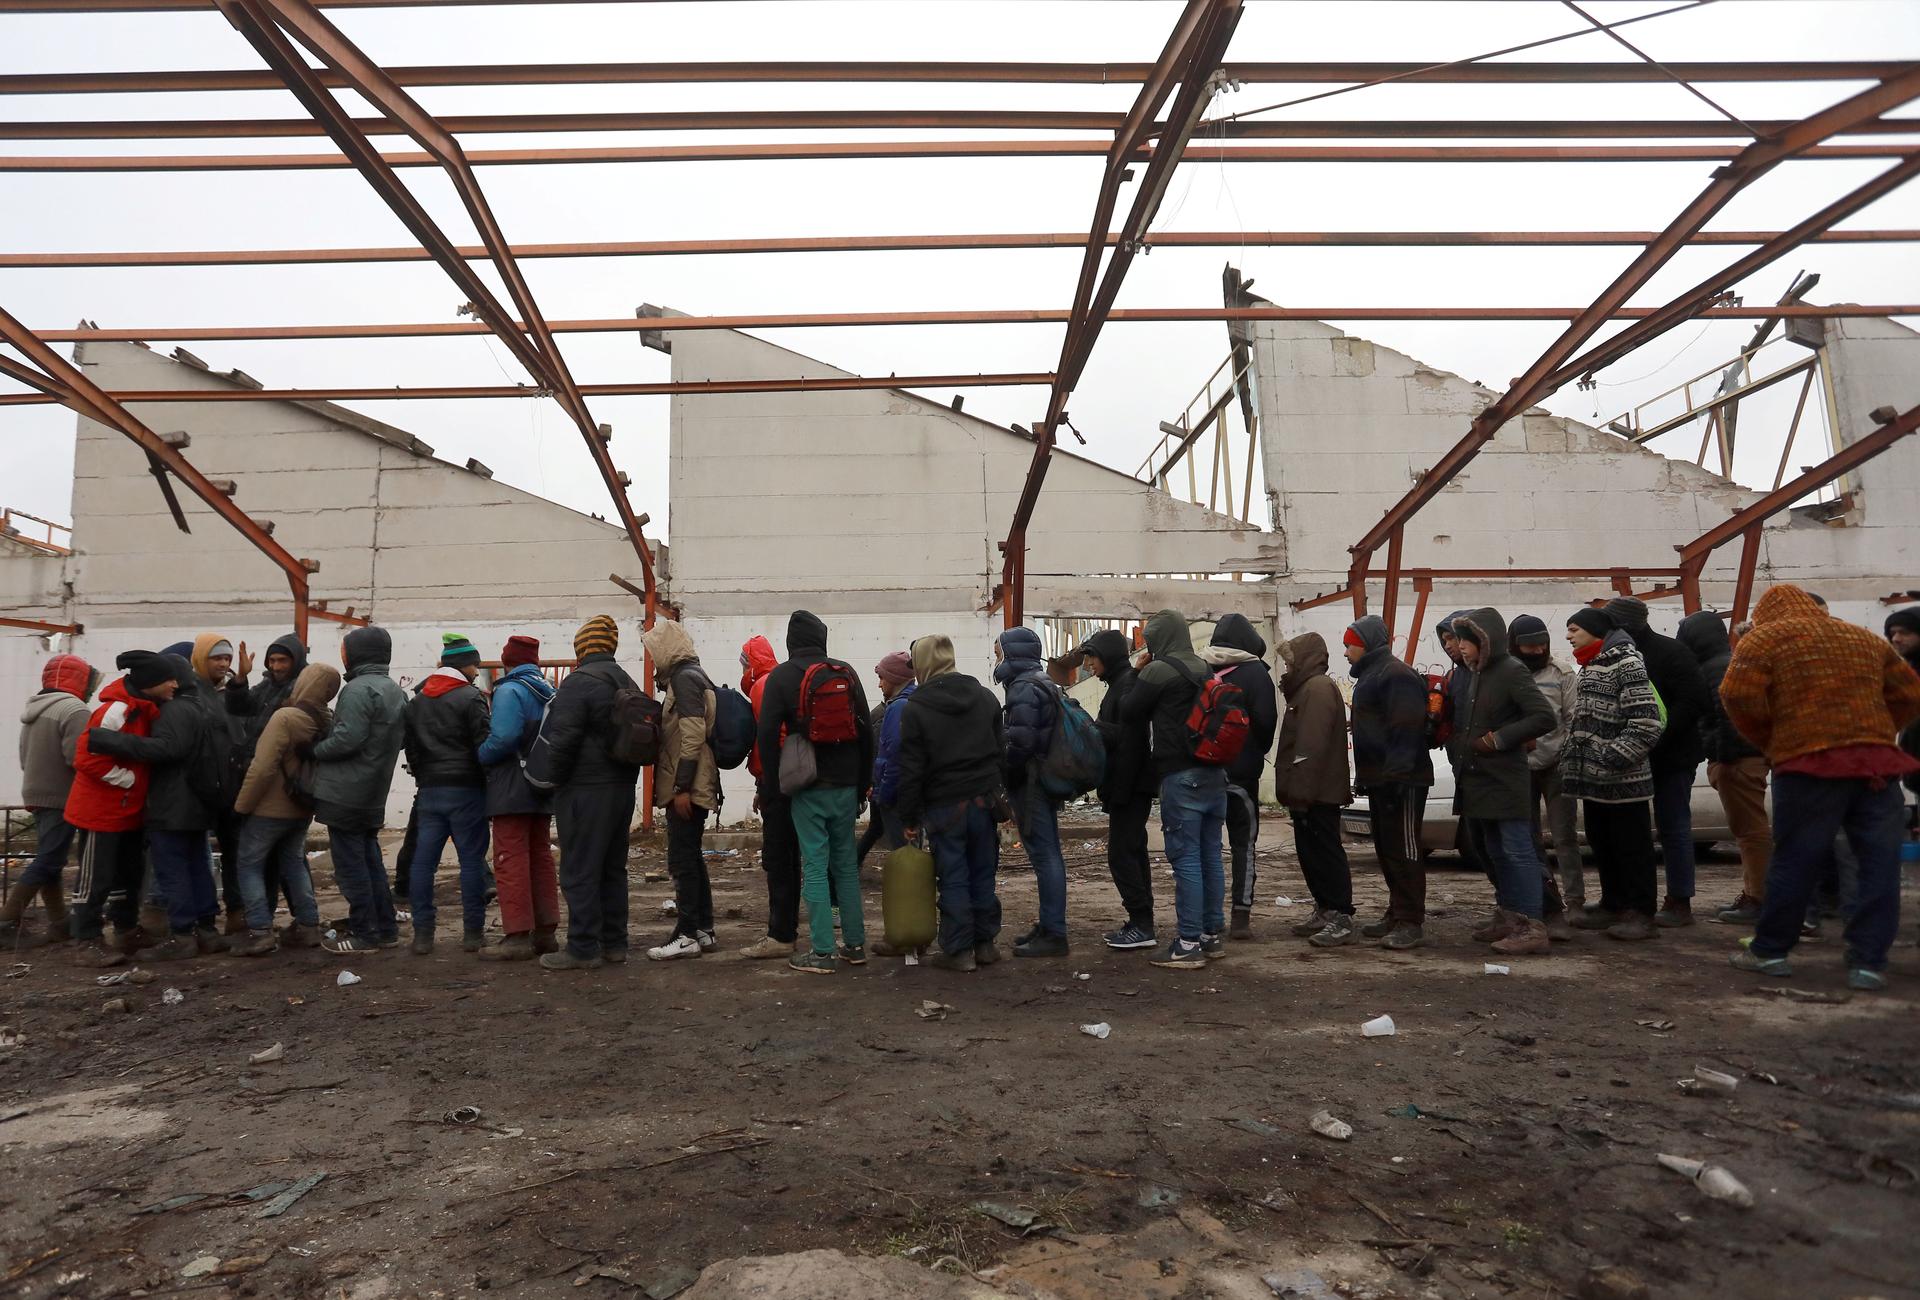 Migrants wait to receive food inside an abandoned factory close to the Croatian border near the town of Sid, Serbia, Dec. 19, 2017. Thousands of migrants and refugees remain stranded in the country. Iraqis and Syrians have the best chances of being grante